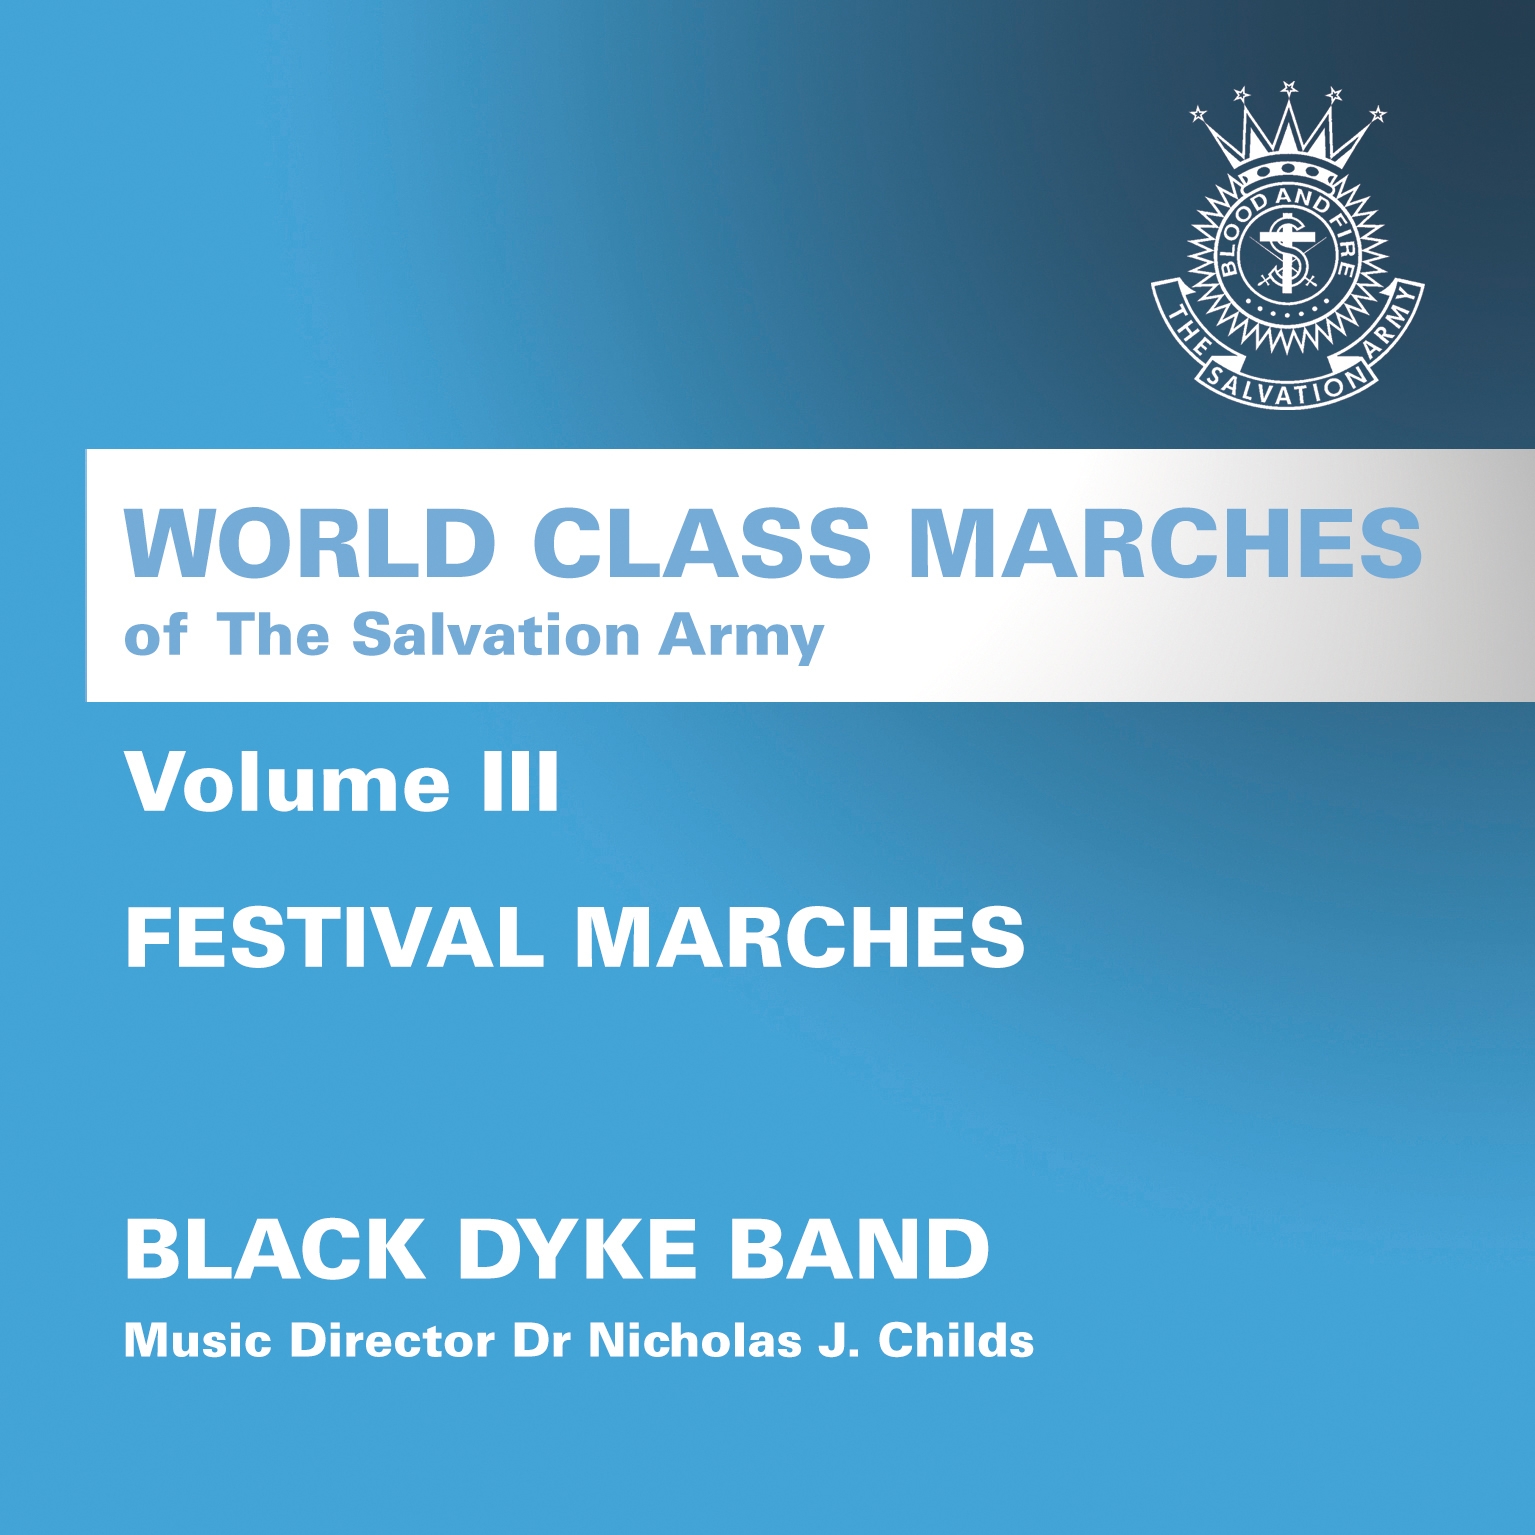 World Class Marches of The Salvation Army Volume III - Festival Marches - Download